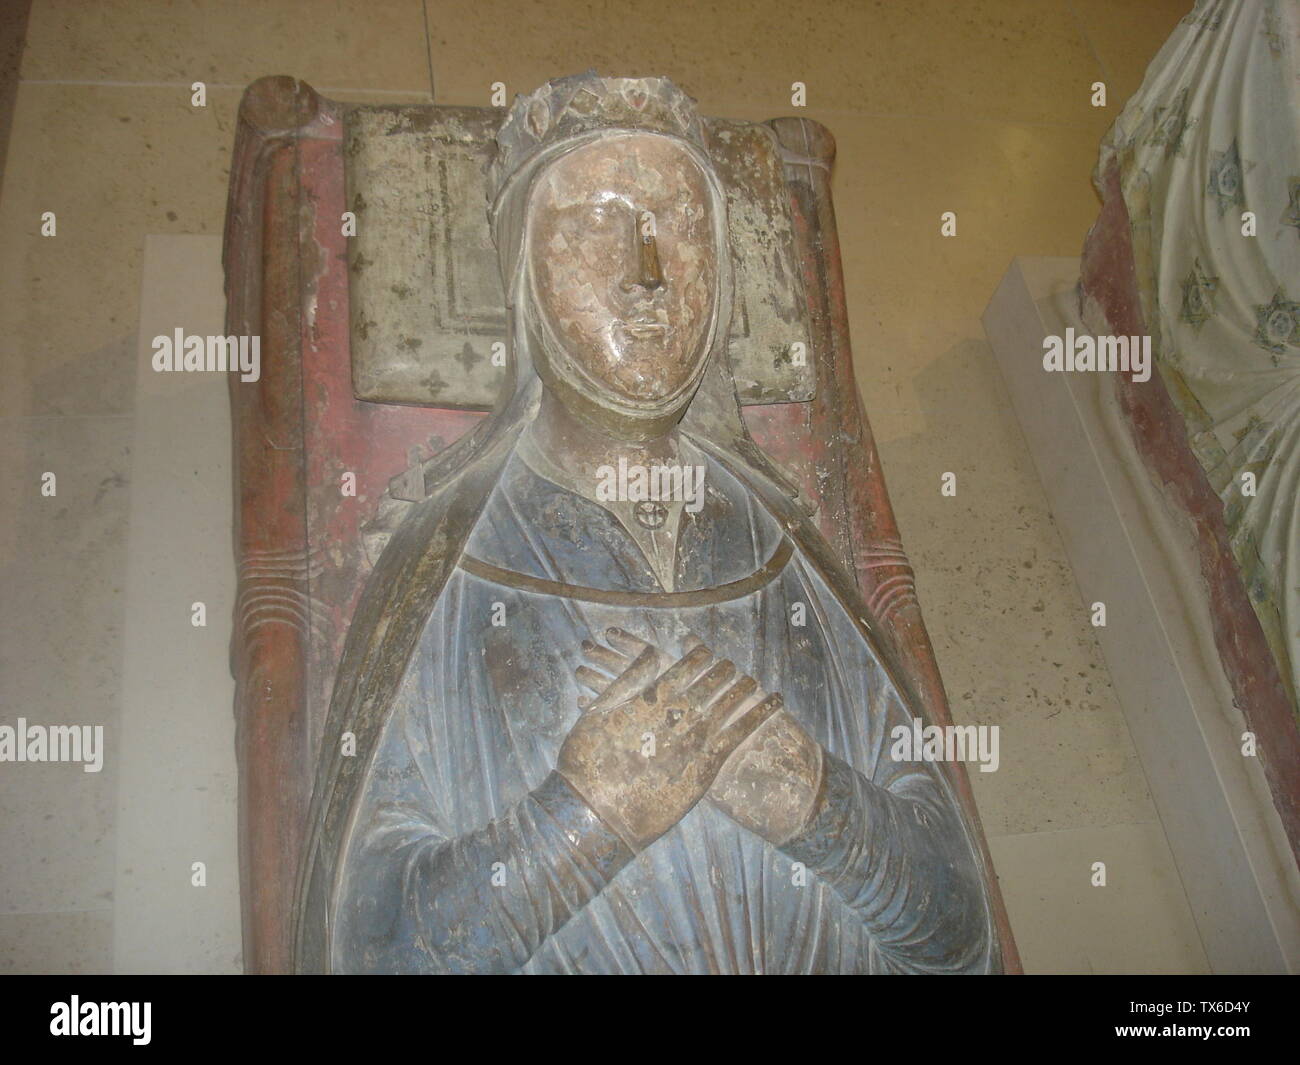 28 03 2006 High Resolution Stock Photography and Images - Alamy